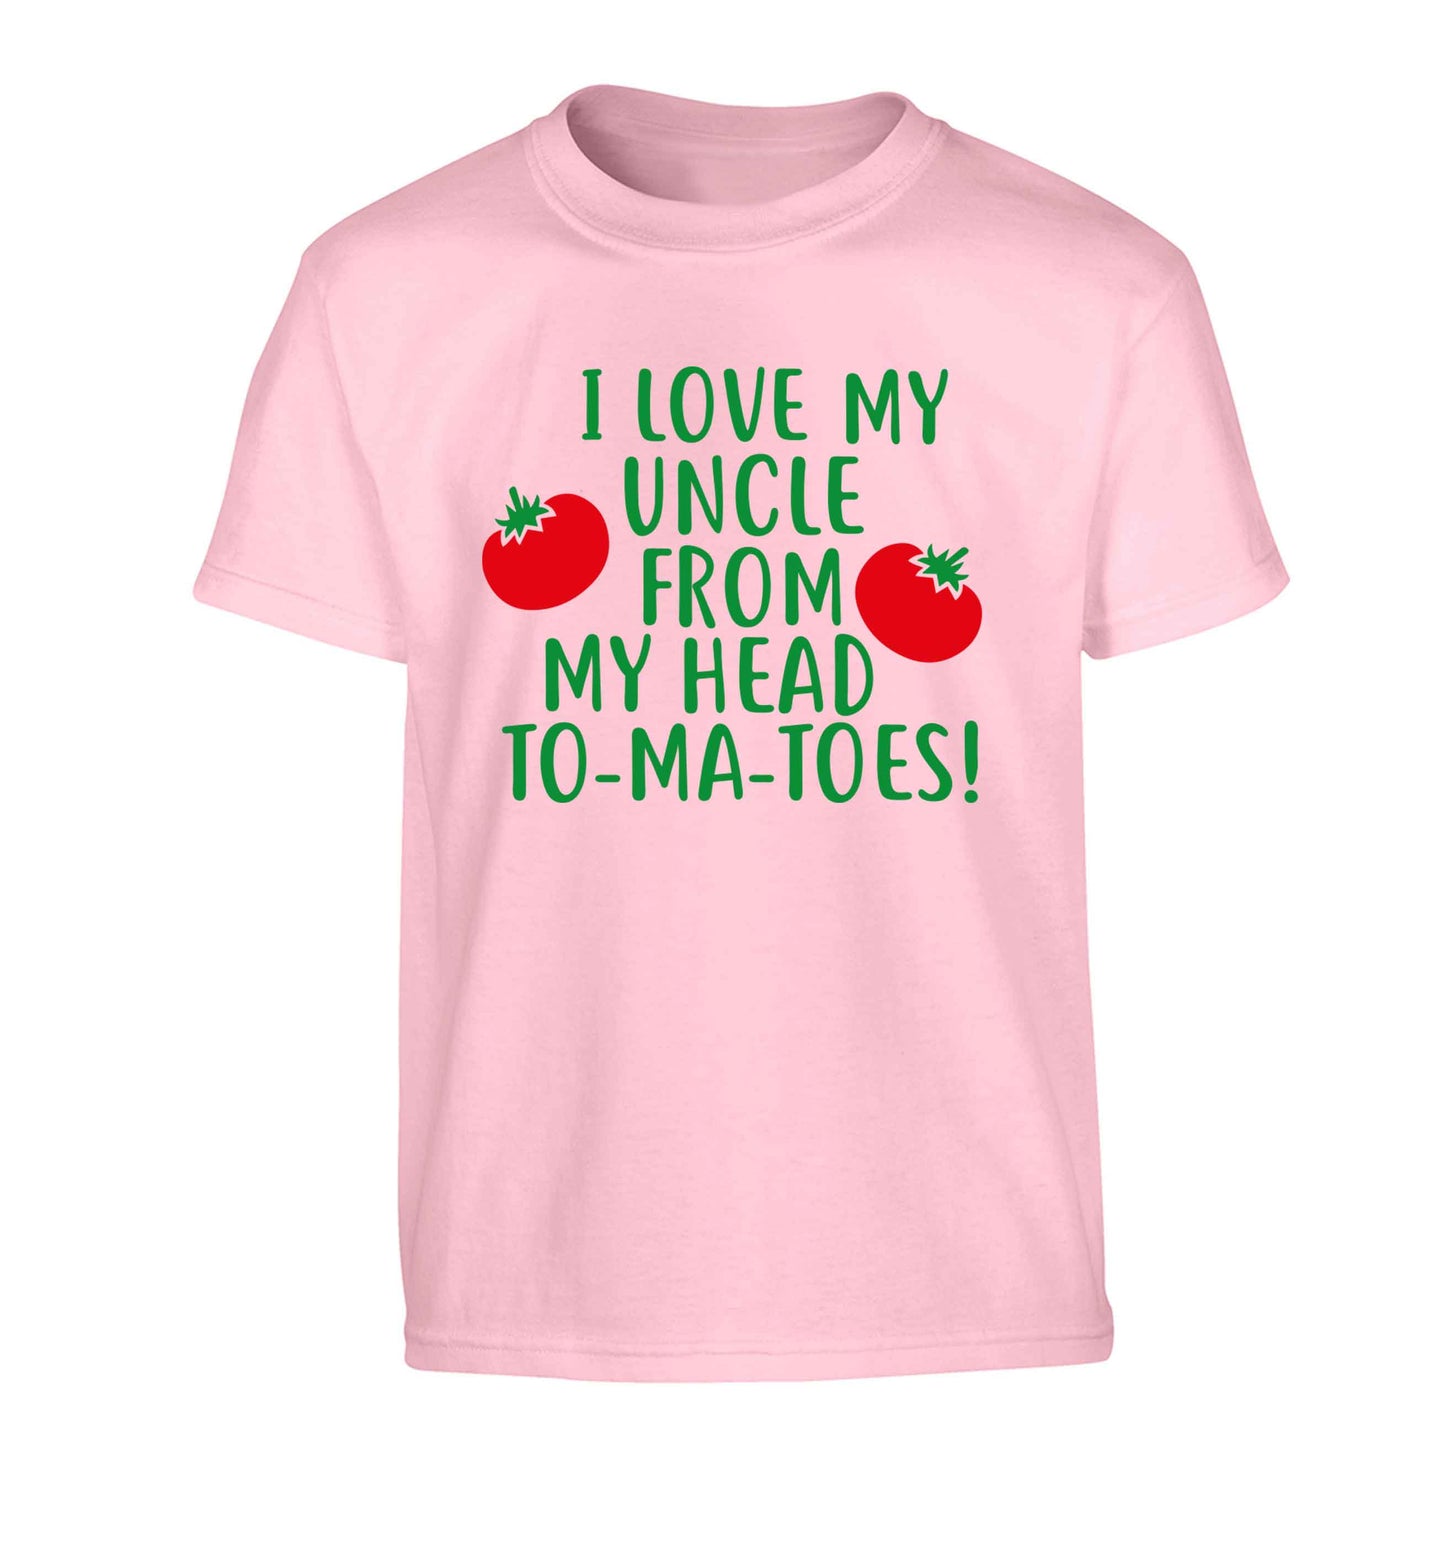 I love my uncle from my head To-Ma-Toes Children's light pink Tshirt 12-13 Years